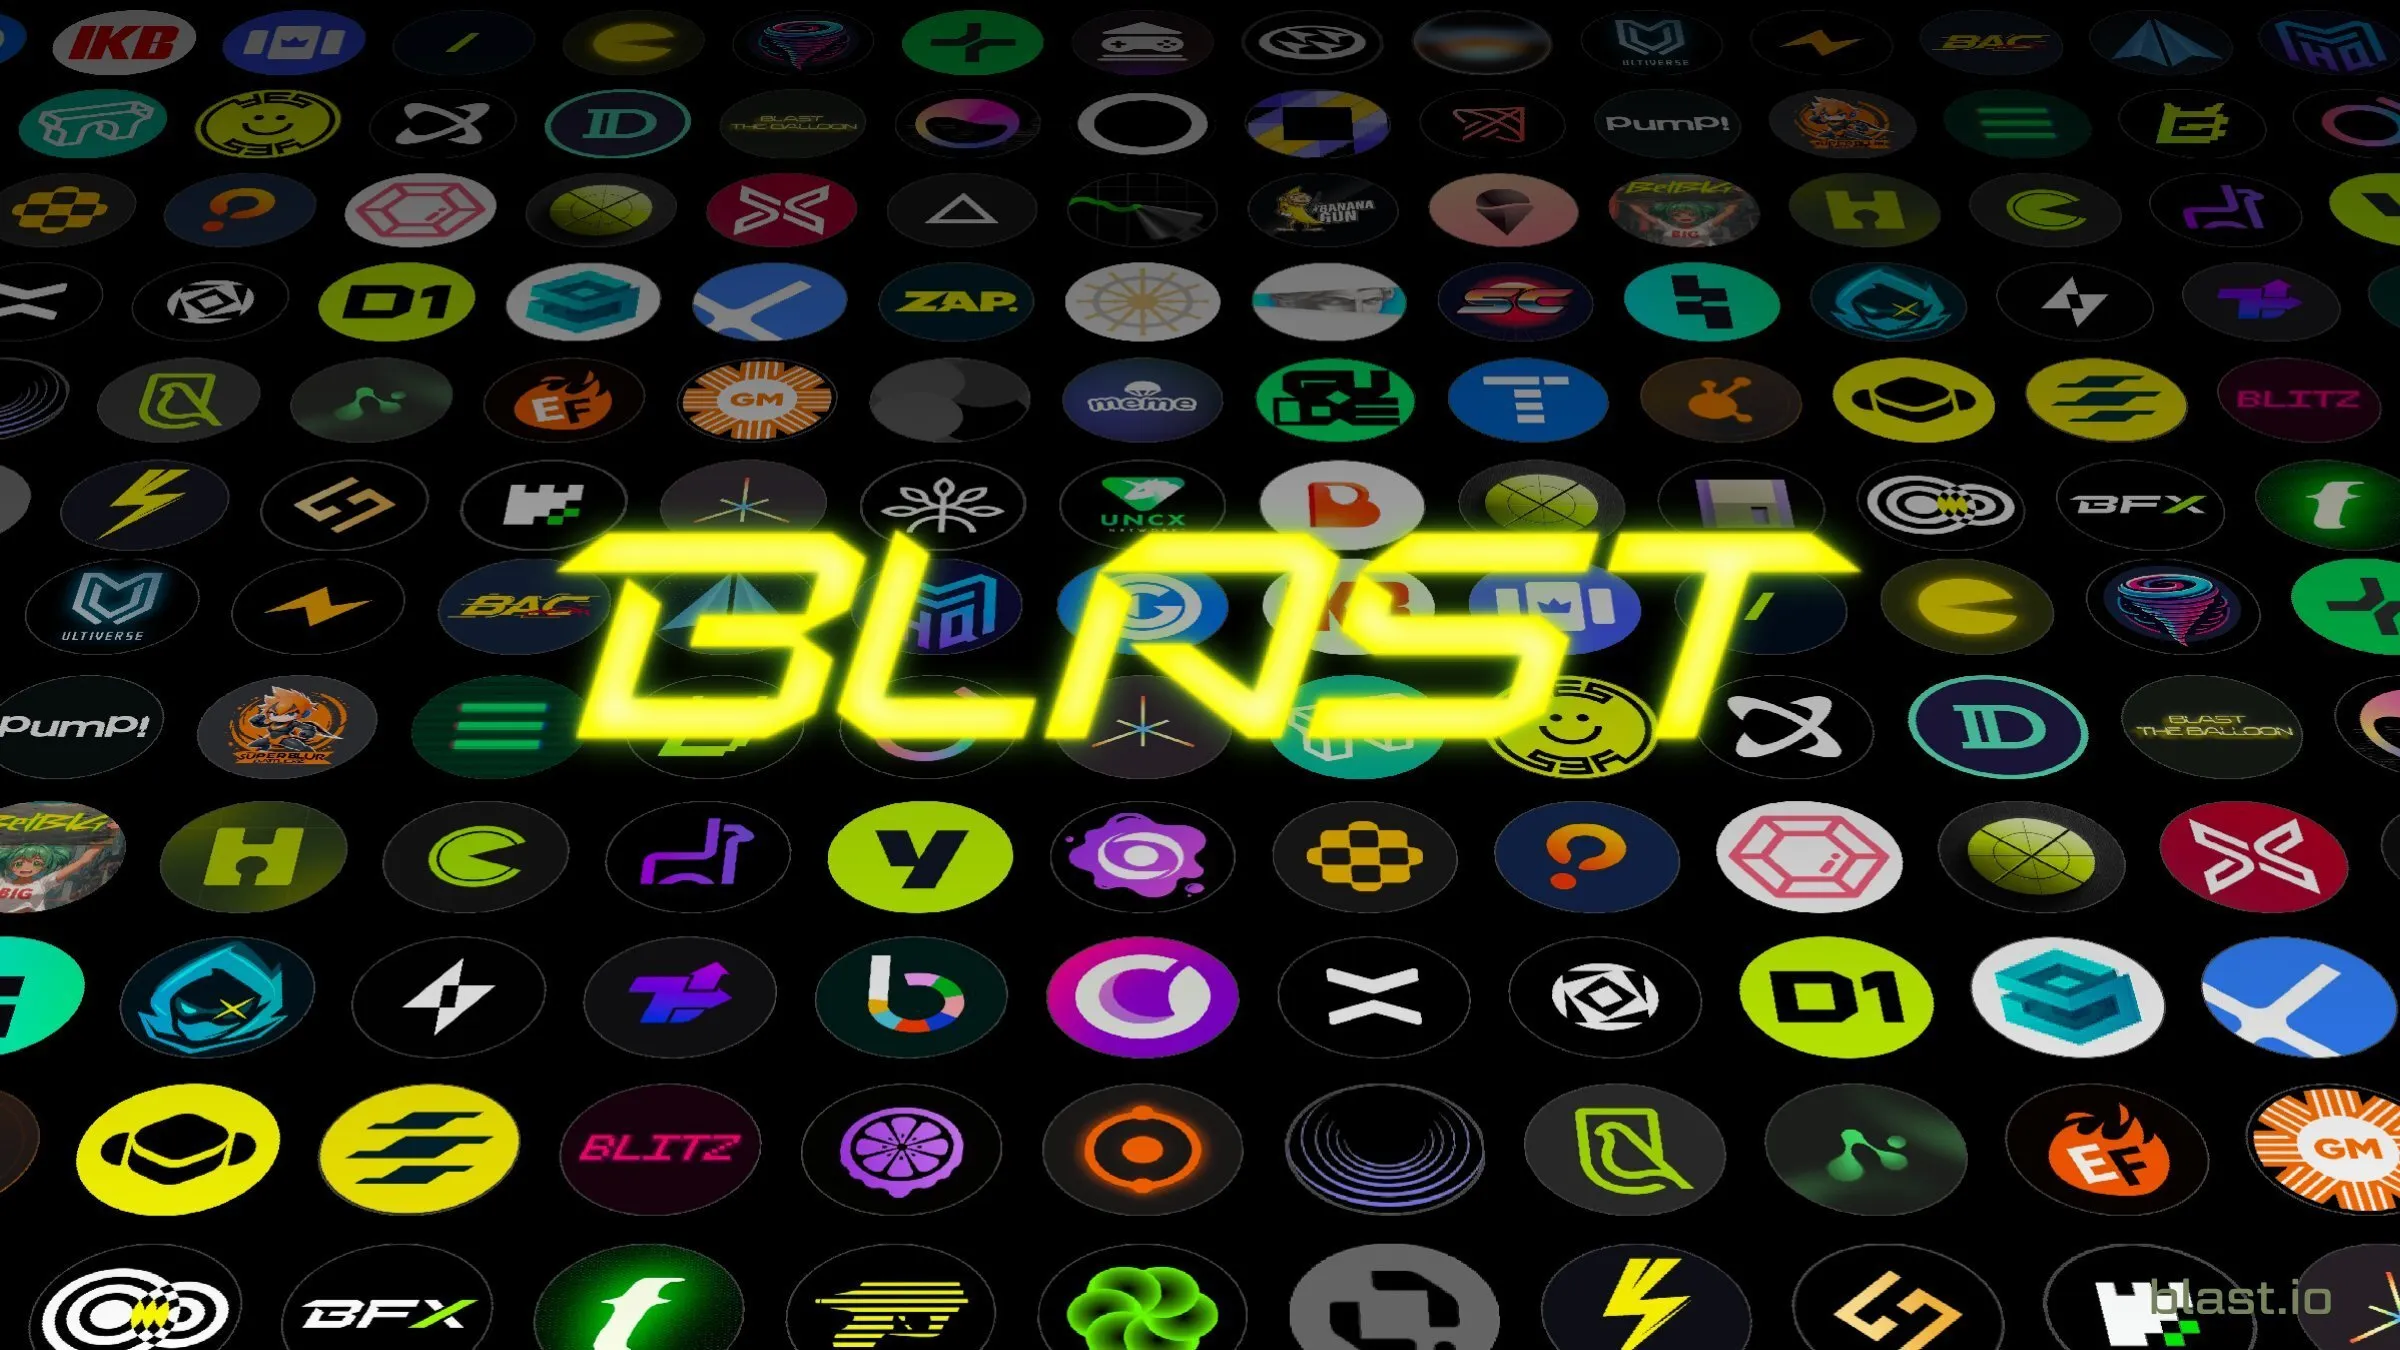 Blast is an Ethereum layer-2 scaling network. Image: Blast